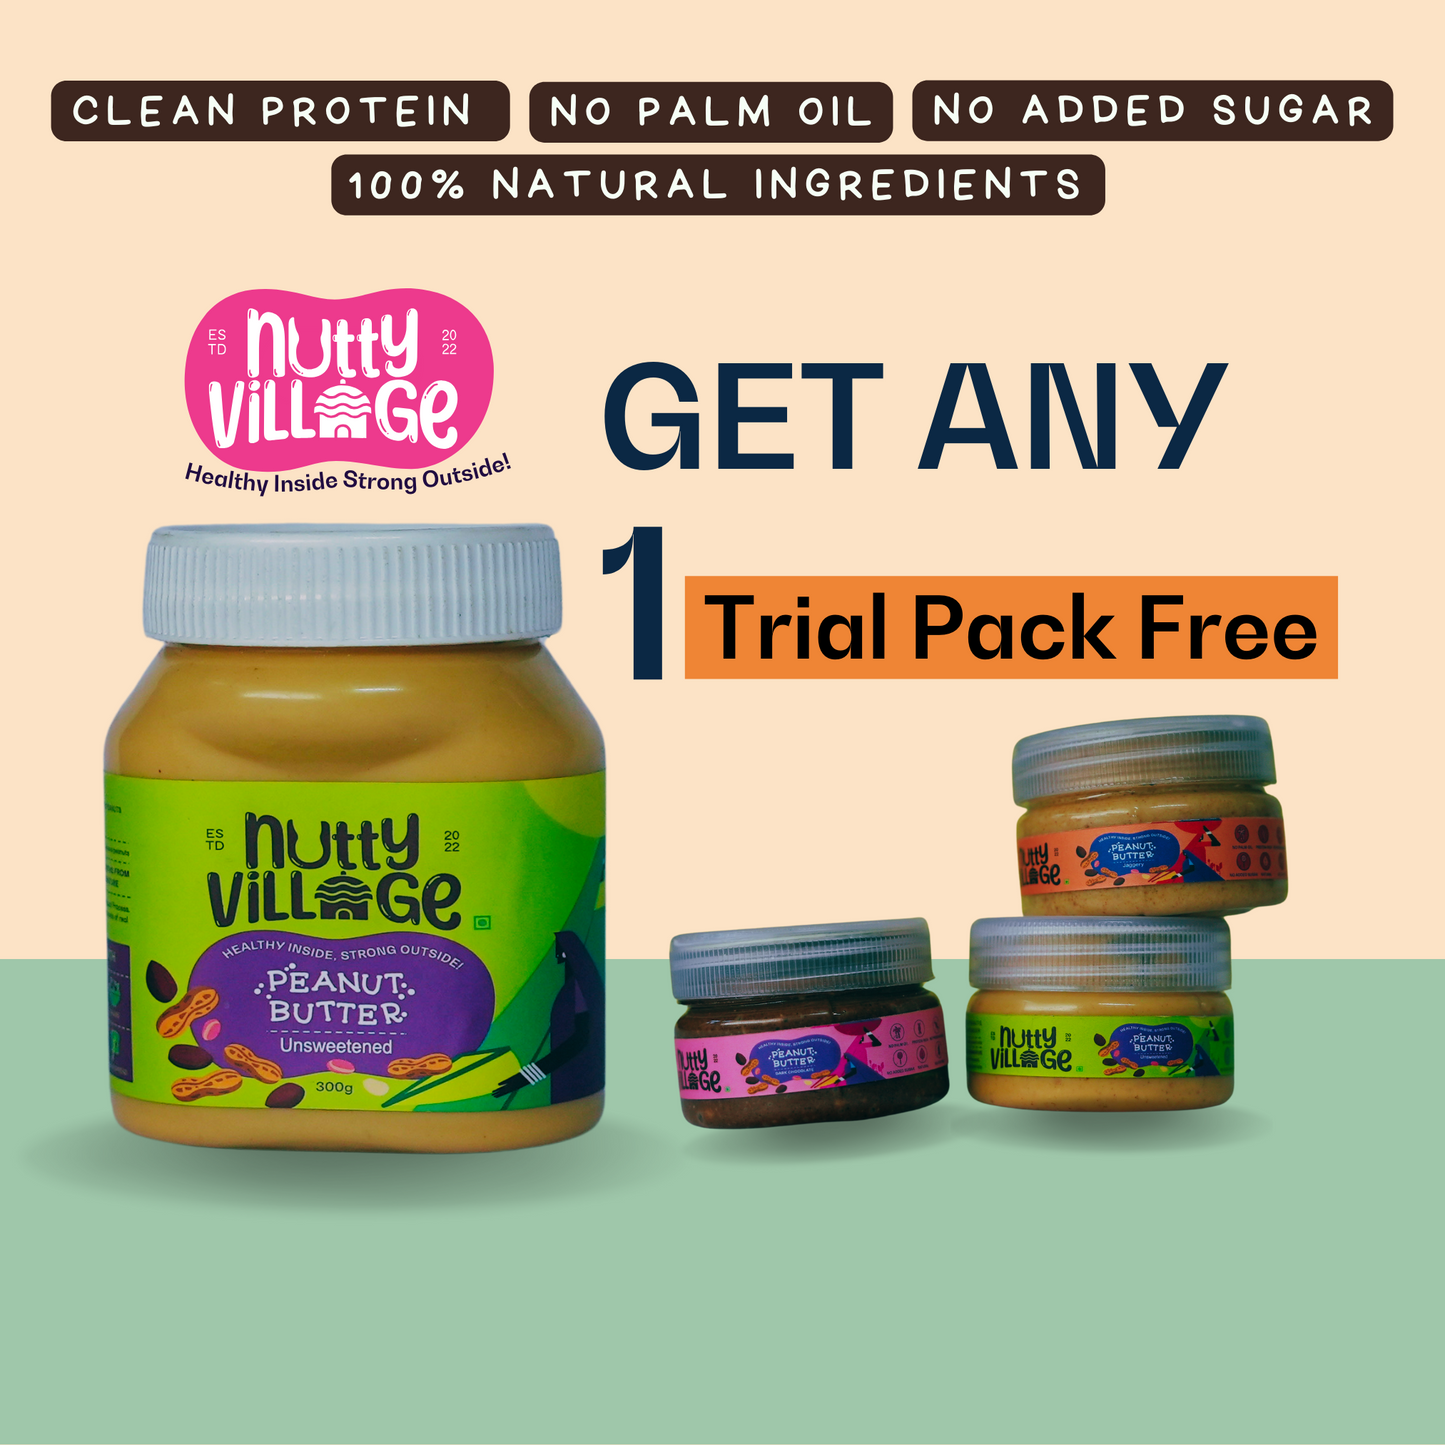 Buy Natural Unsweetened Peanut Butter 300gm and a Free Trial Pack